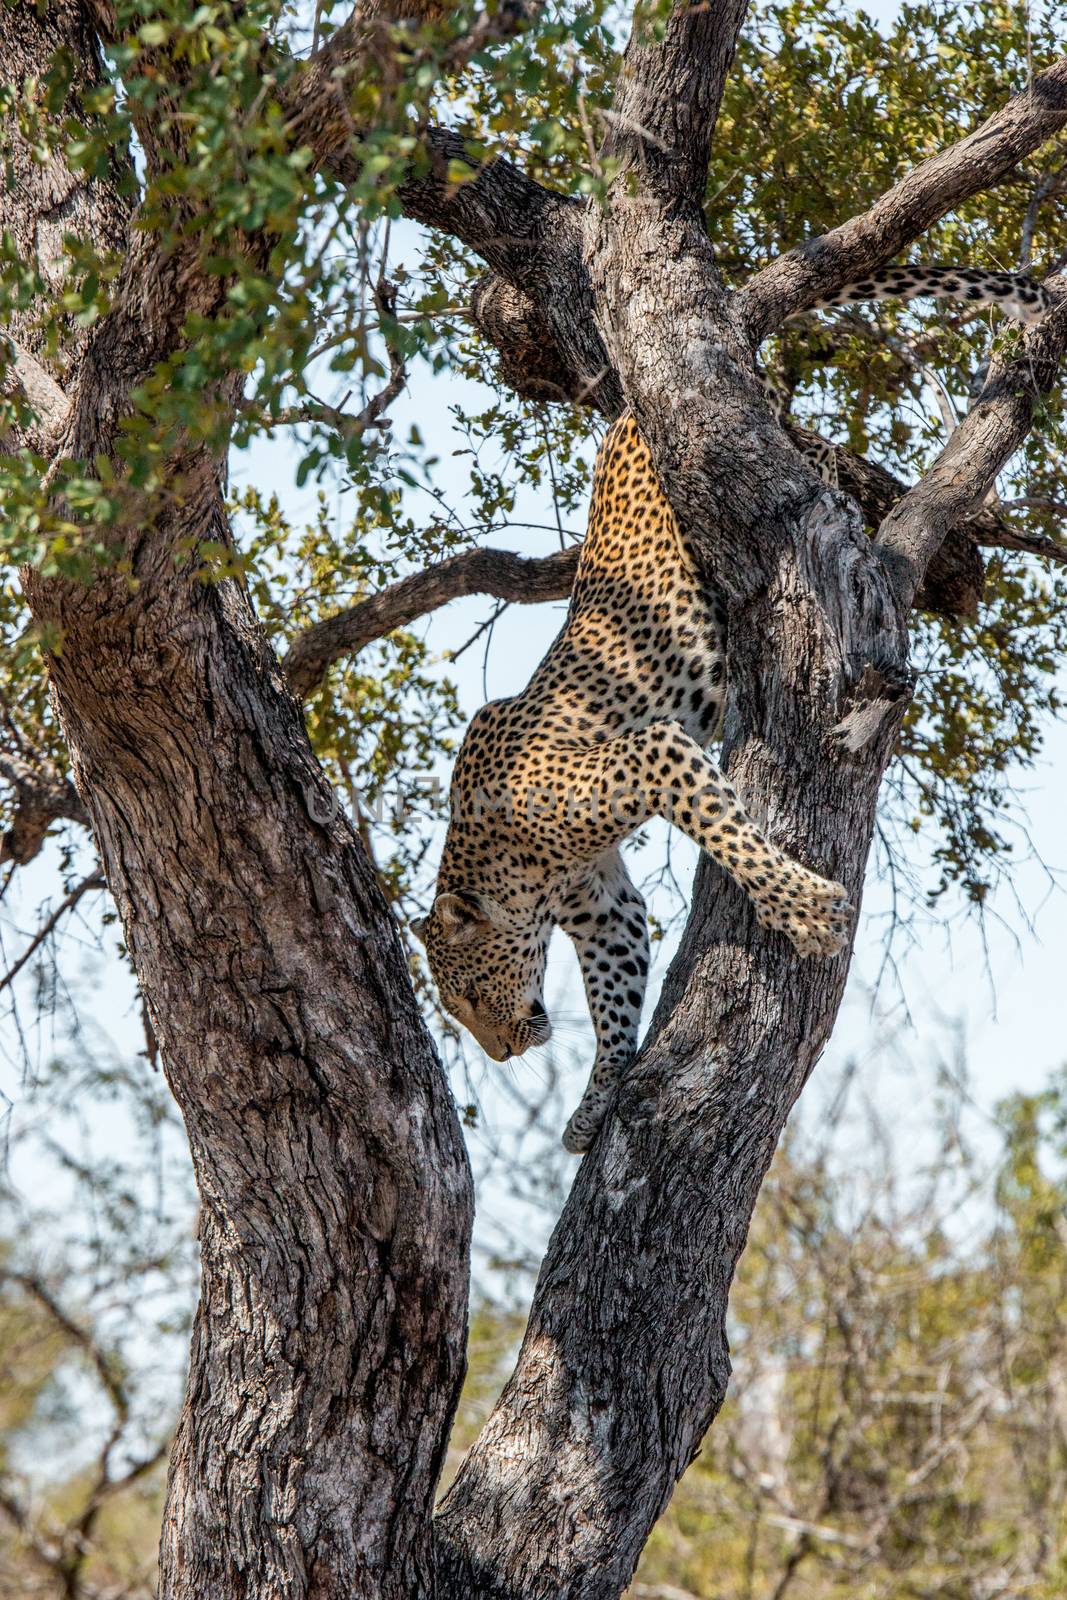 Leopard in a tree in the Kruger National Park, South Africa. by Simoneemanphotography